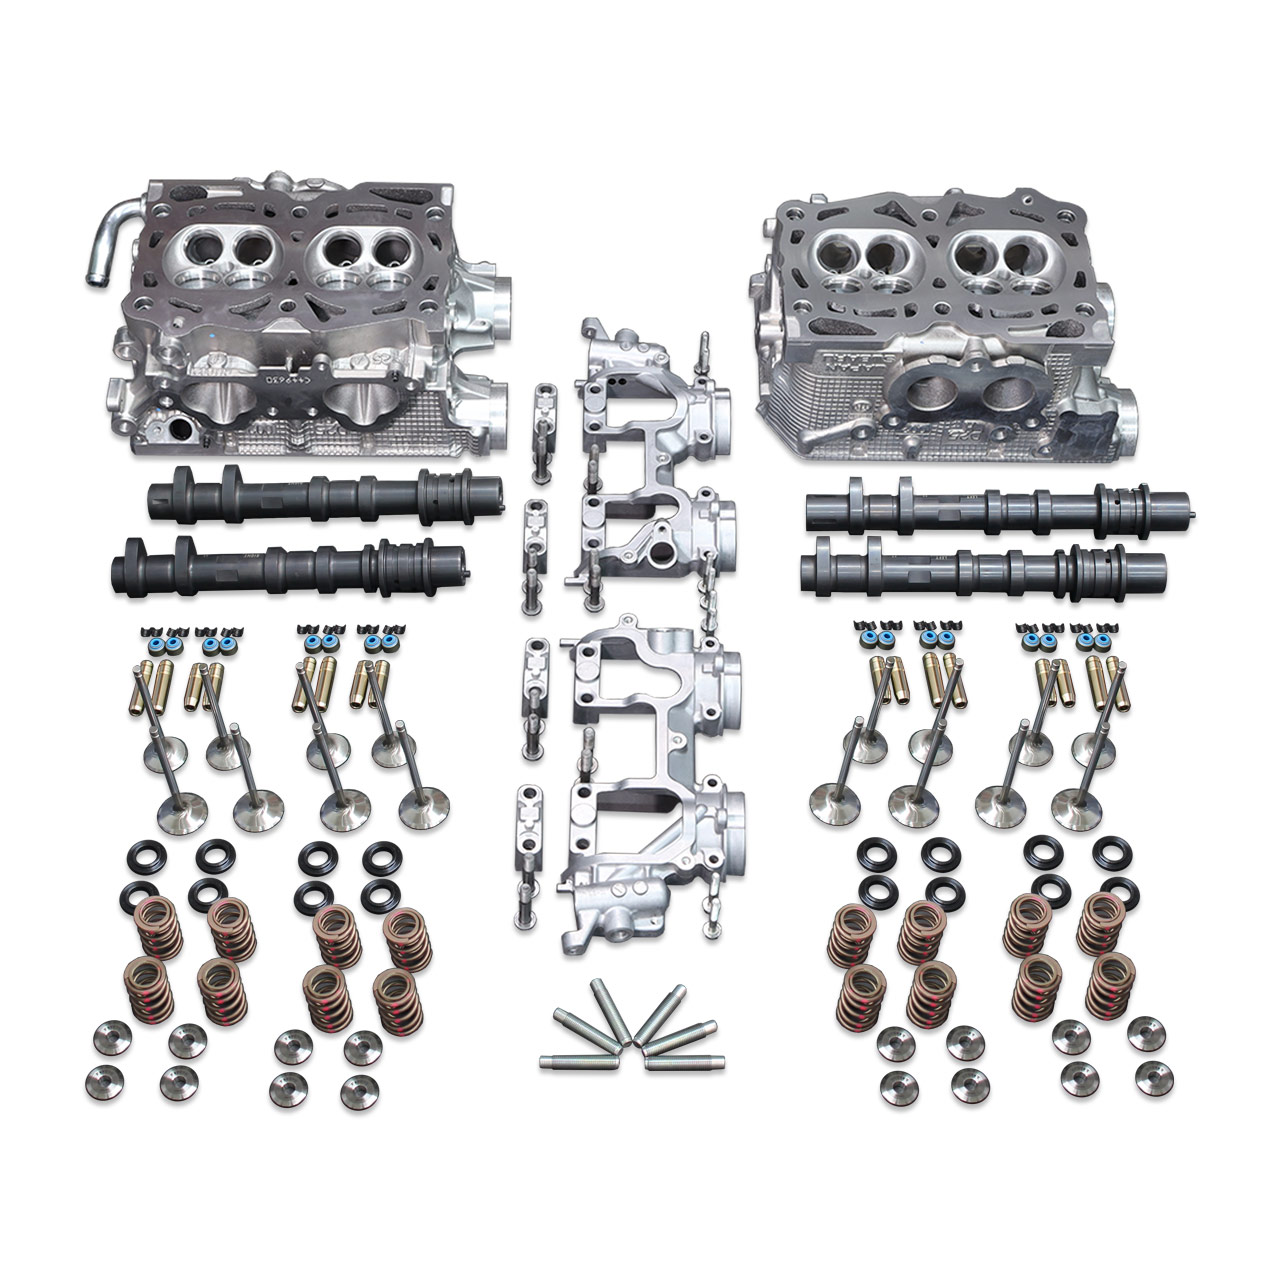 IAG 1150 CNC Ported Drag Cylinder Head Package For 02-14 WRX, 04-21 STI, 04-13 FXT, 05-09 LGT (Cams & Lifters Optional)